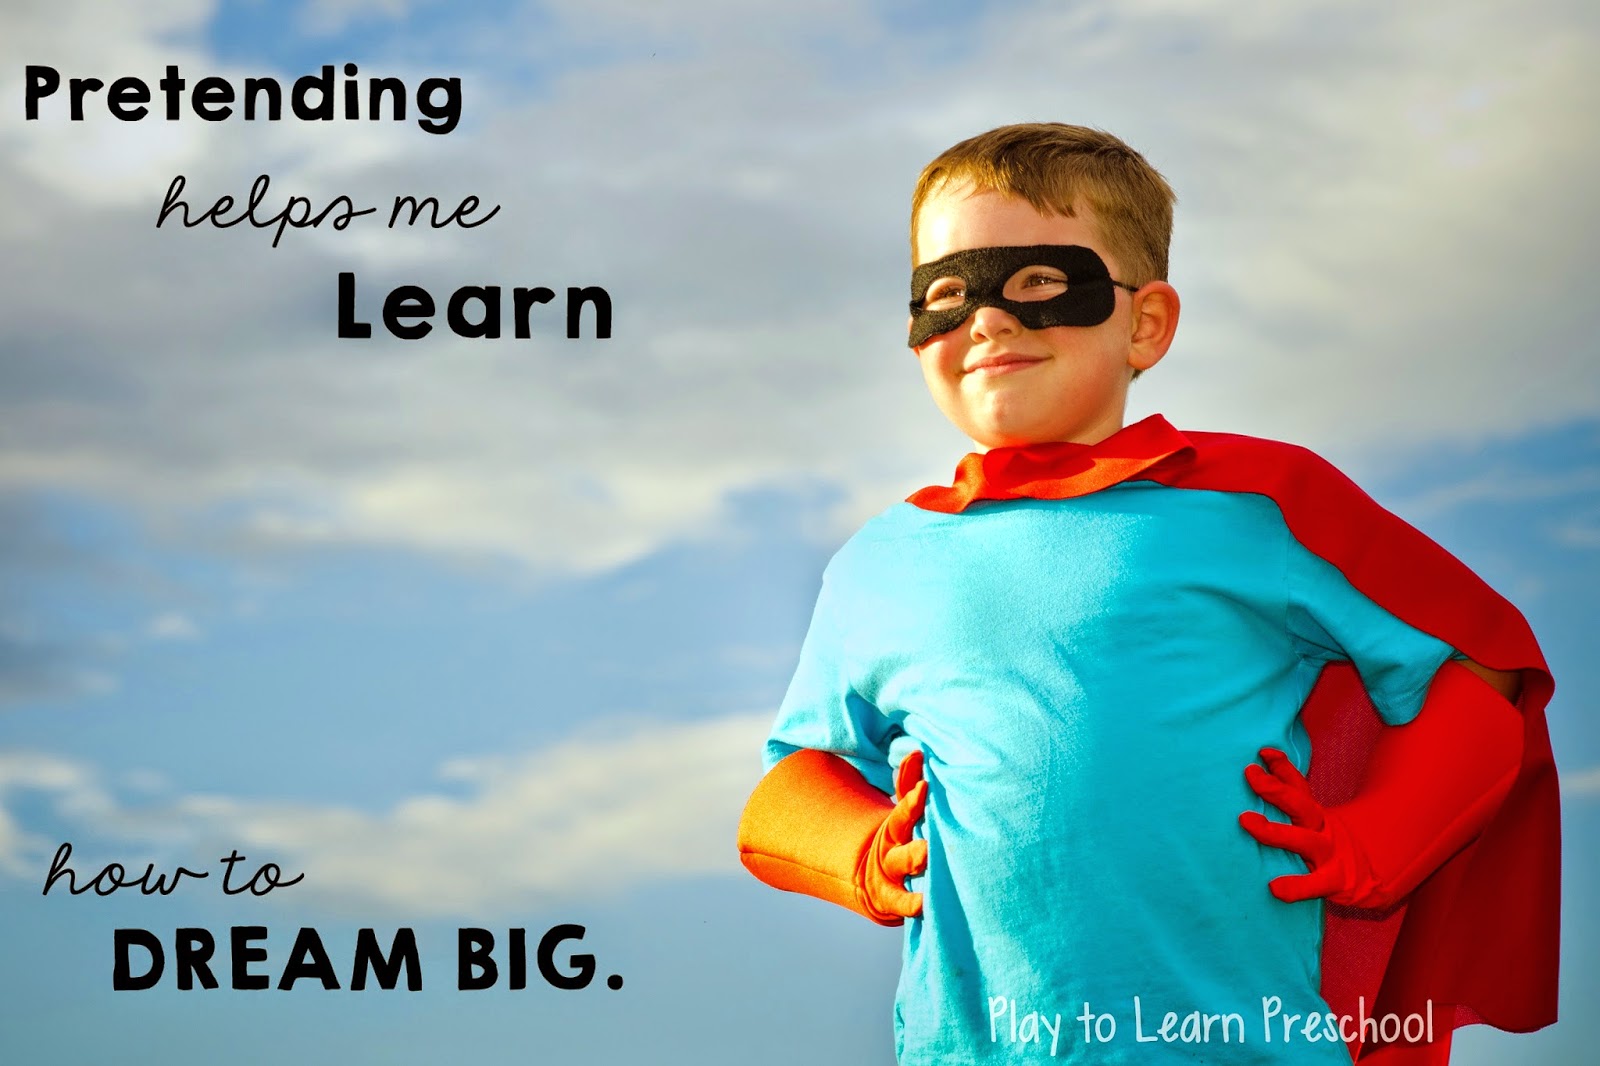 Play Quote - Inspiration from Play to Learn Preschool